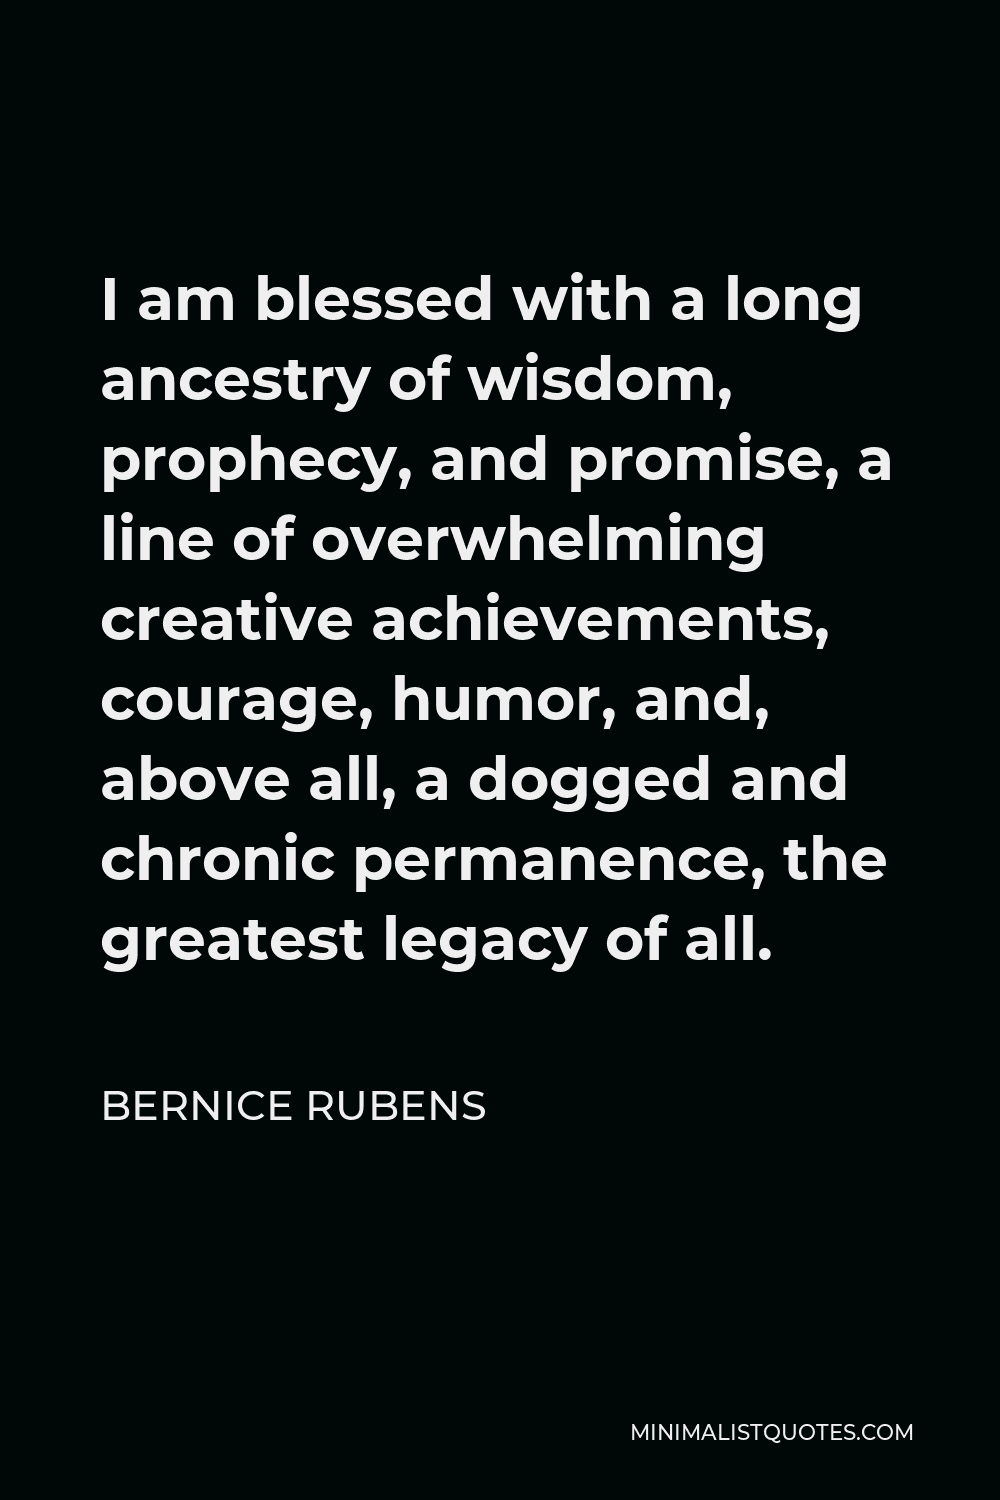 Bernice Rubens Quote - I am blessed with a long ancestry of wisdom, prophecy, and promise, a line of overwhelming creative achievements, courage, humor, and, above all, a dogged and chronic permanence, the greatest legacy of all.